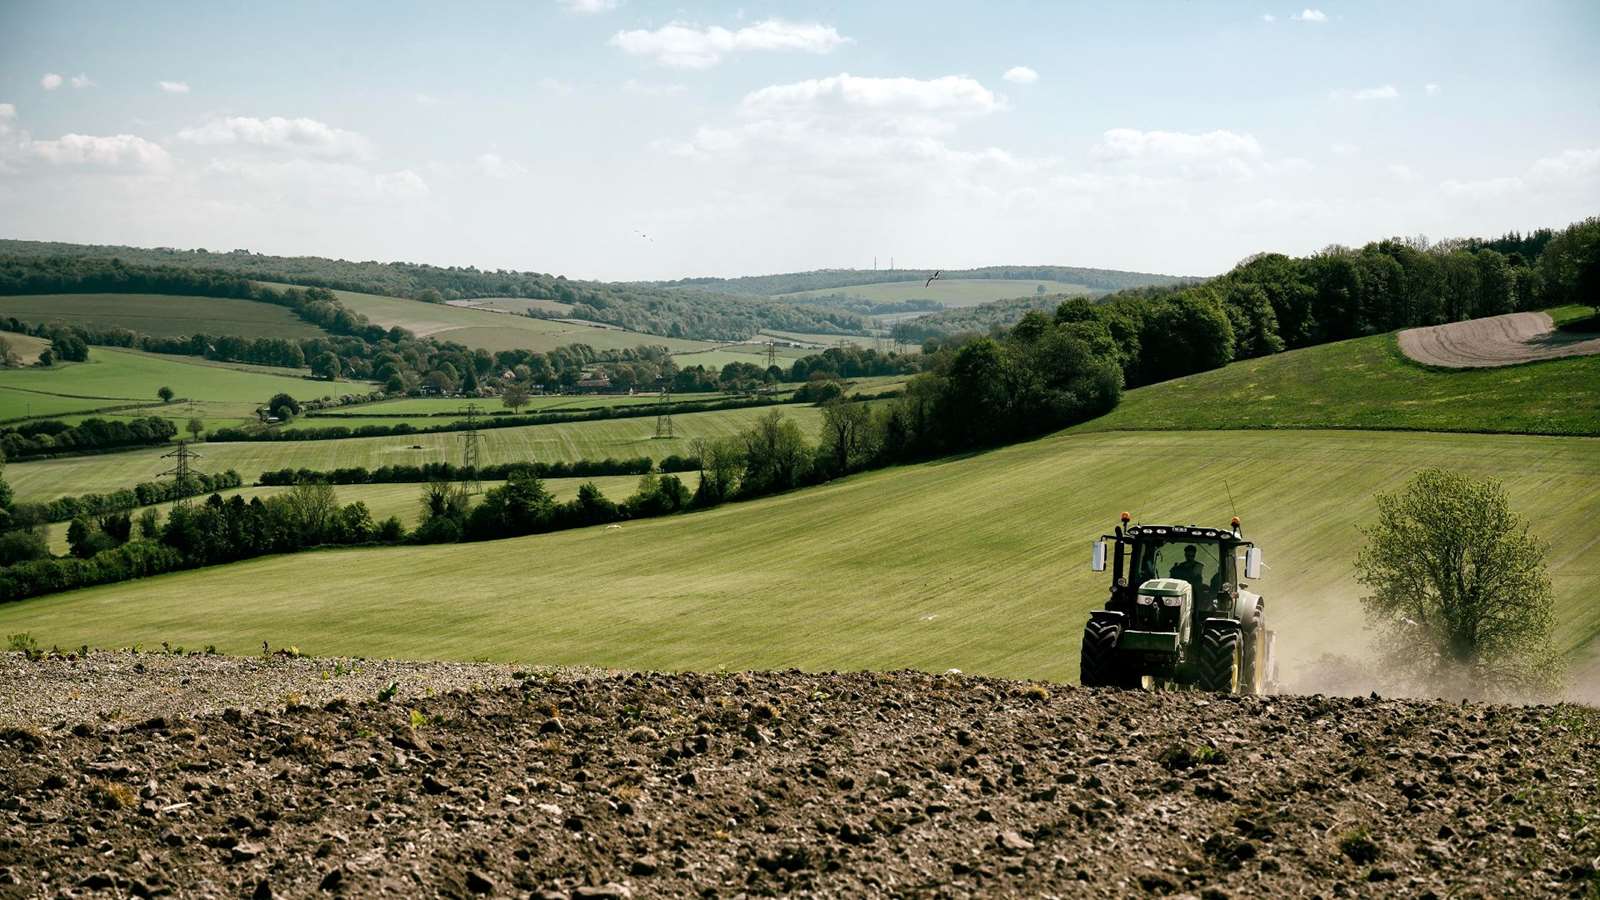 A tractor in one of the surrounding fields of the Goodwood Estate.